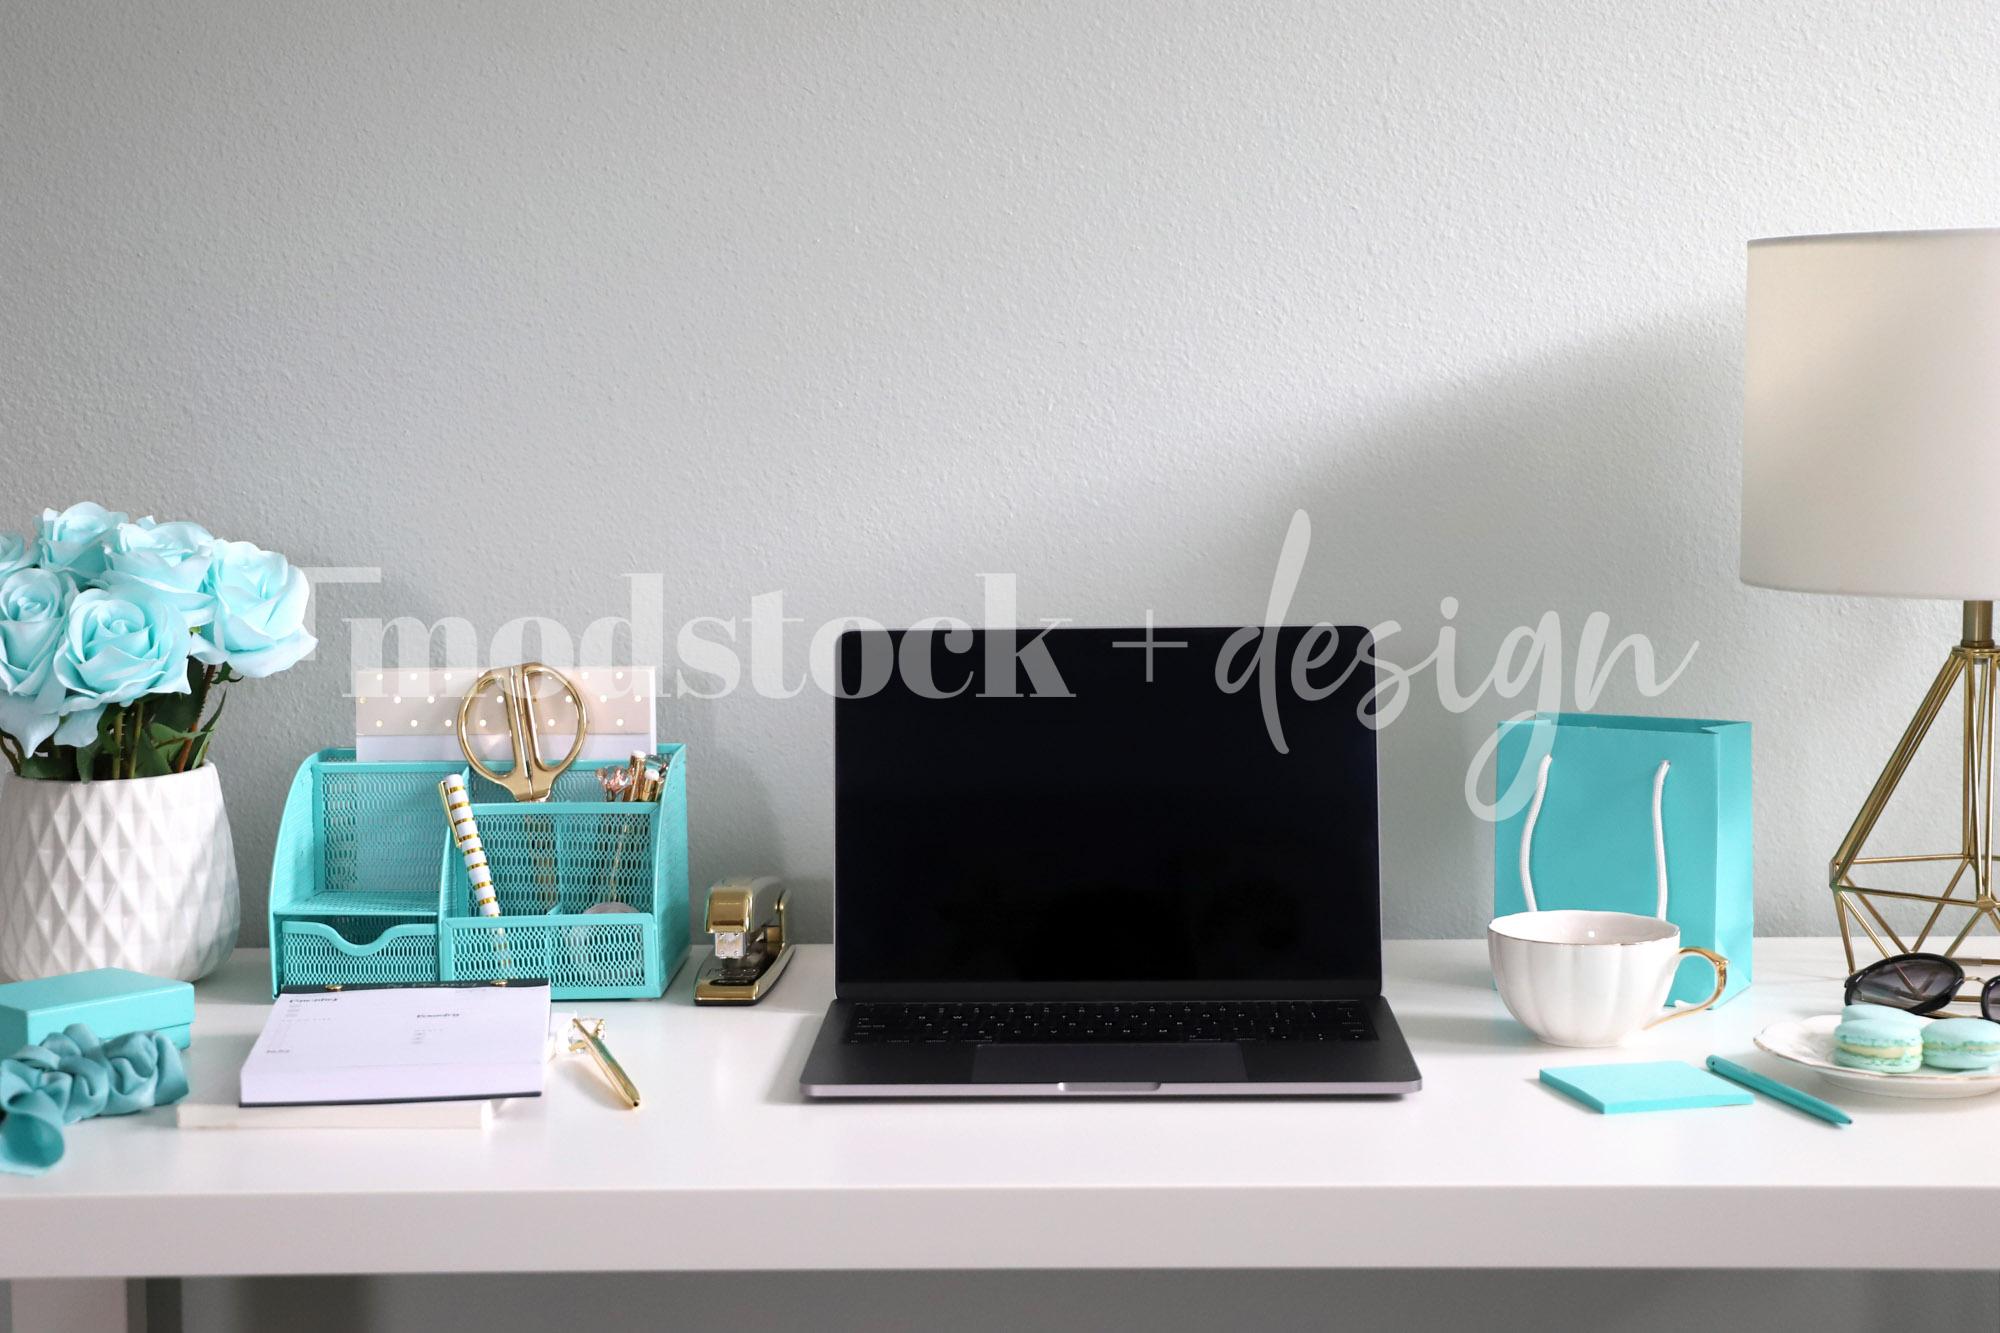 Modstock Luxe Teal Workspace - Gold 7